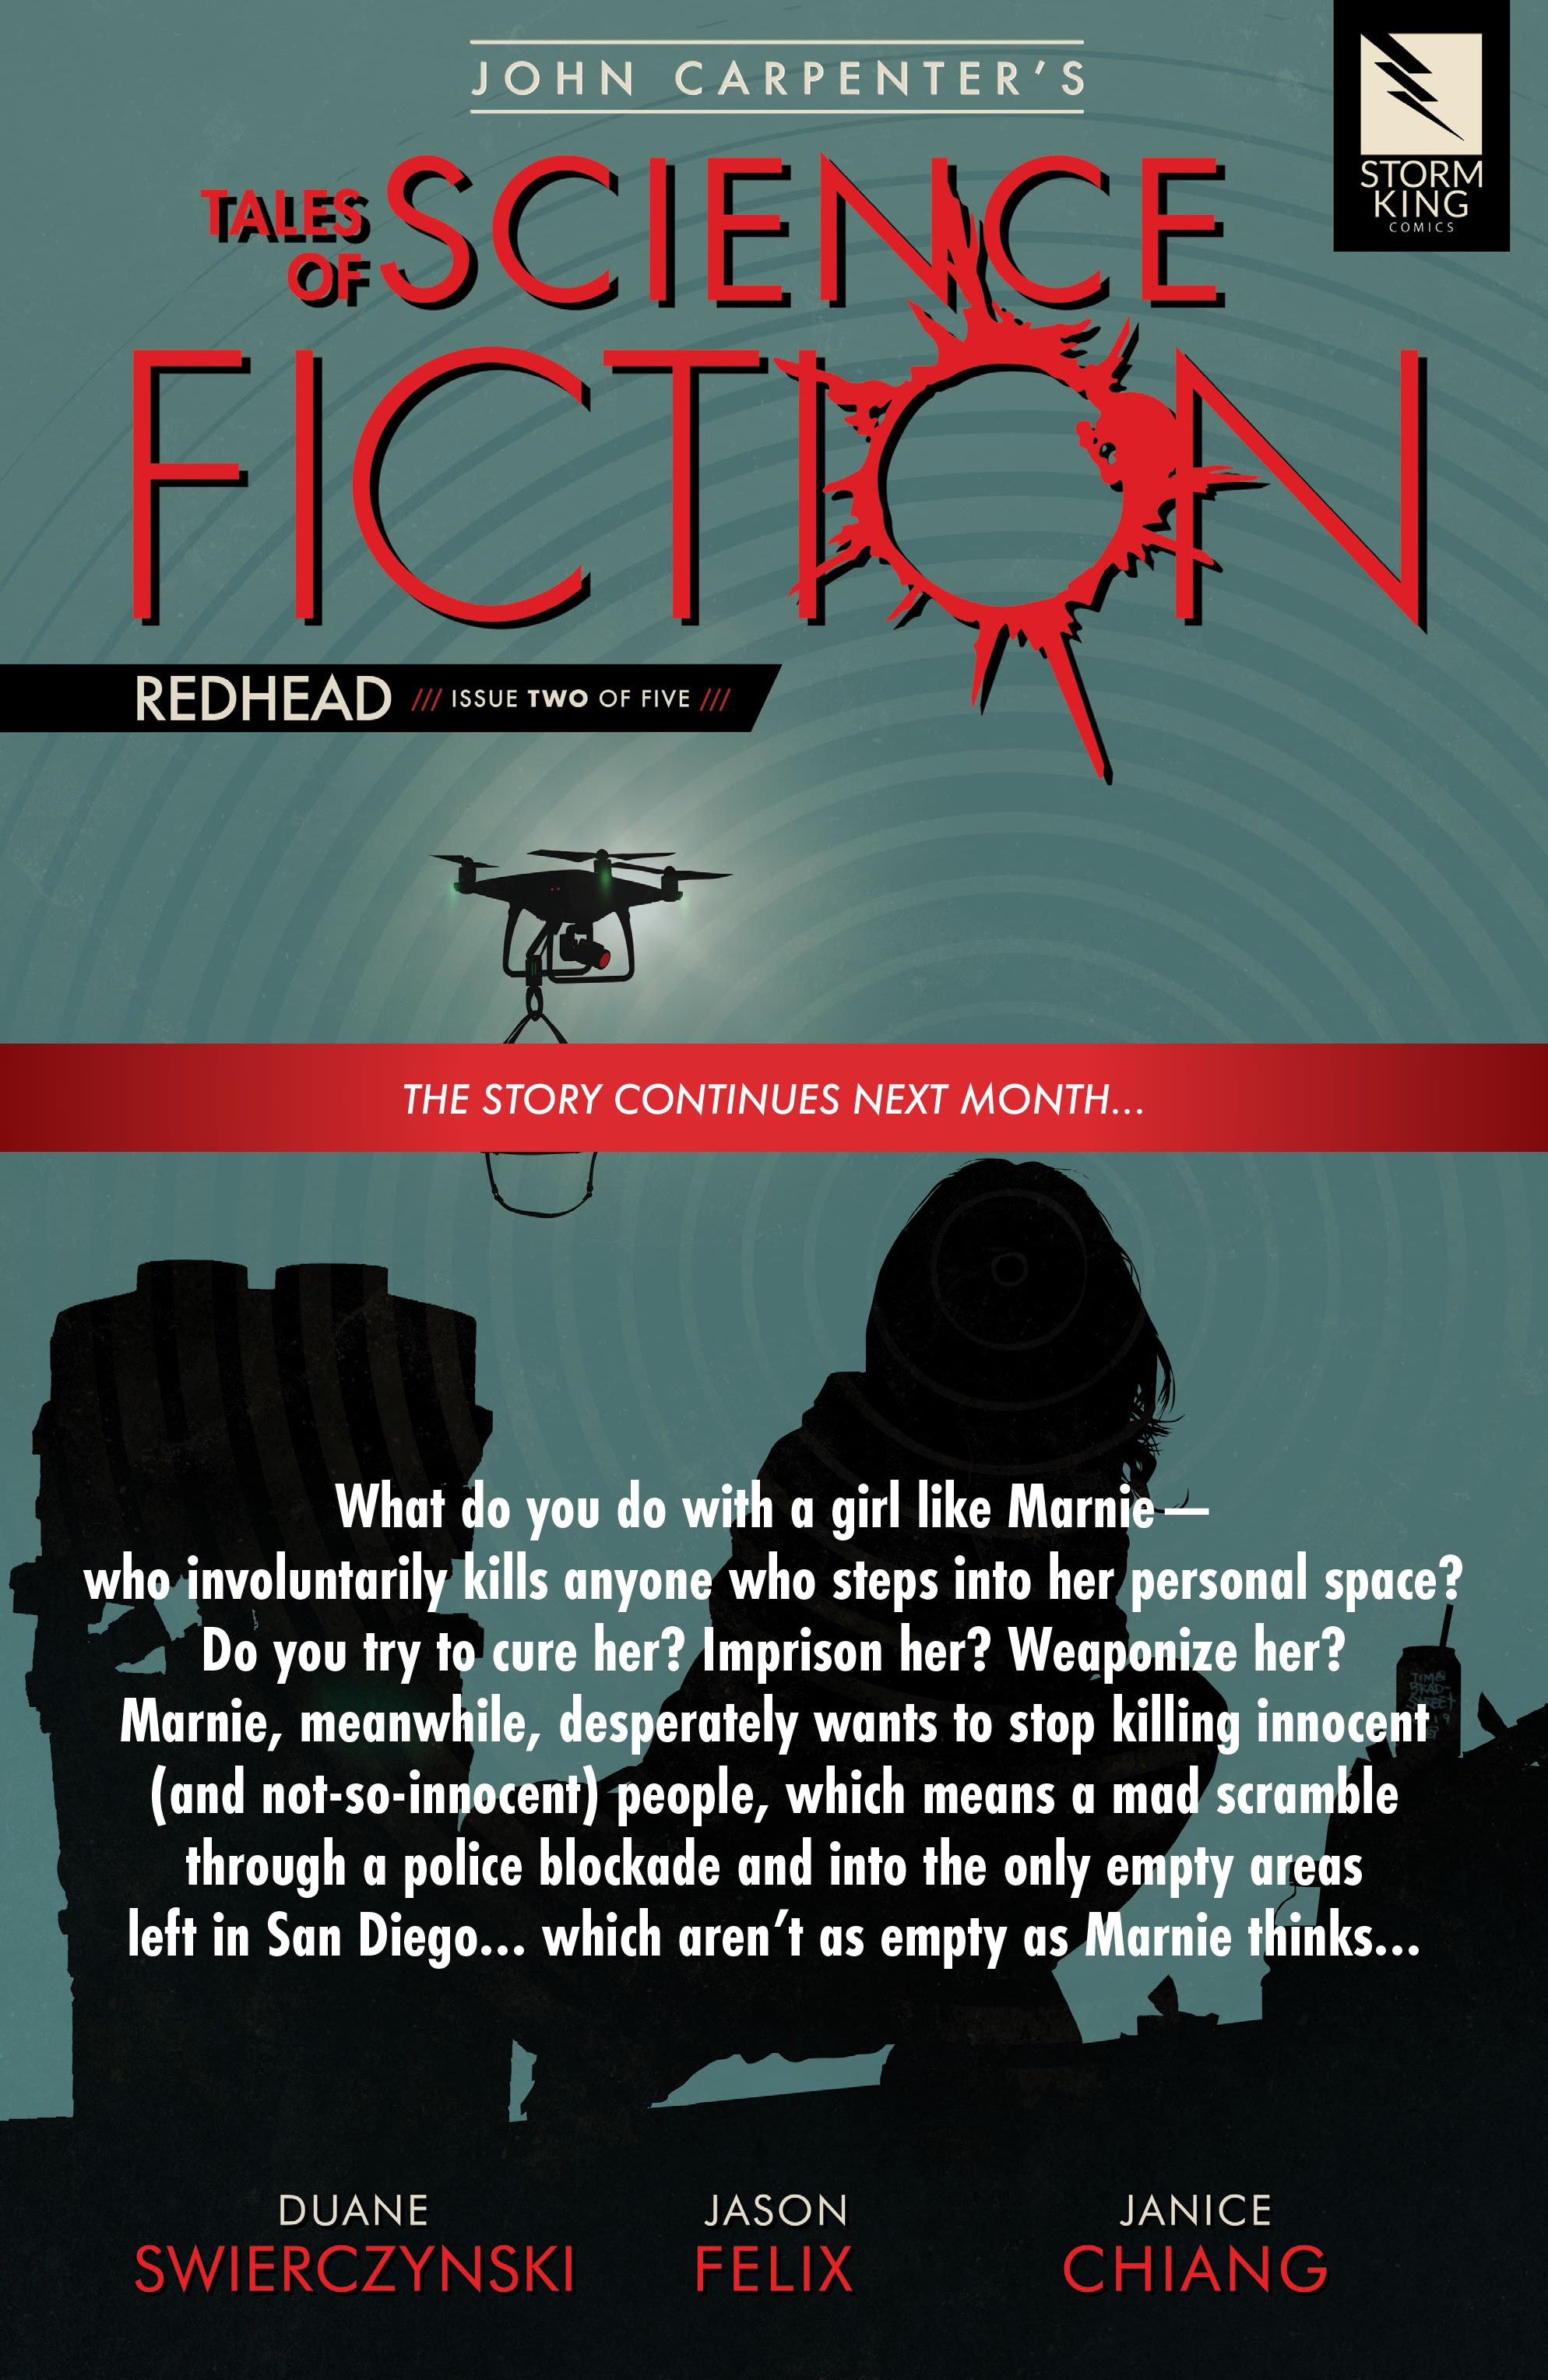 Read online John Carpenter's Tales of Science Fiction: Redhead comic -  Issue #1 - 25